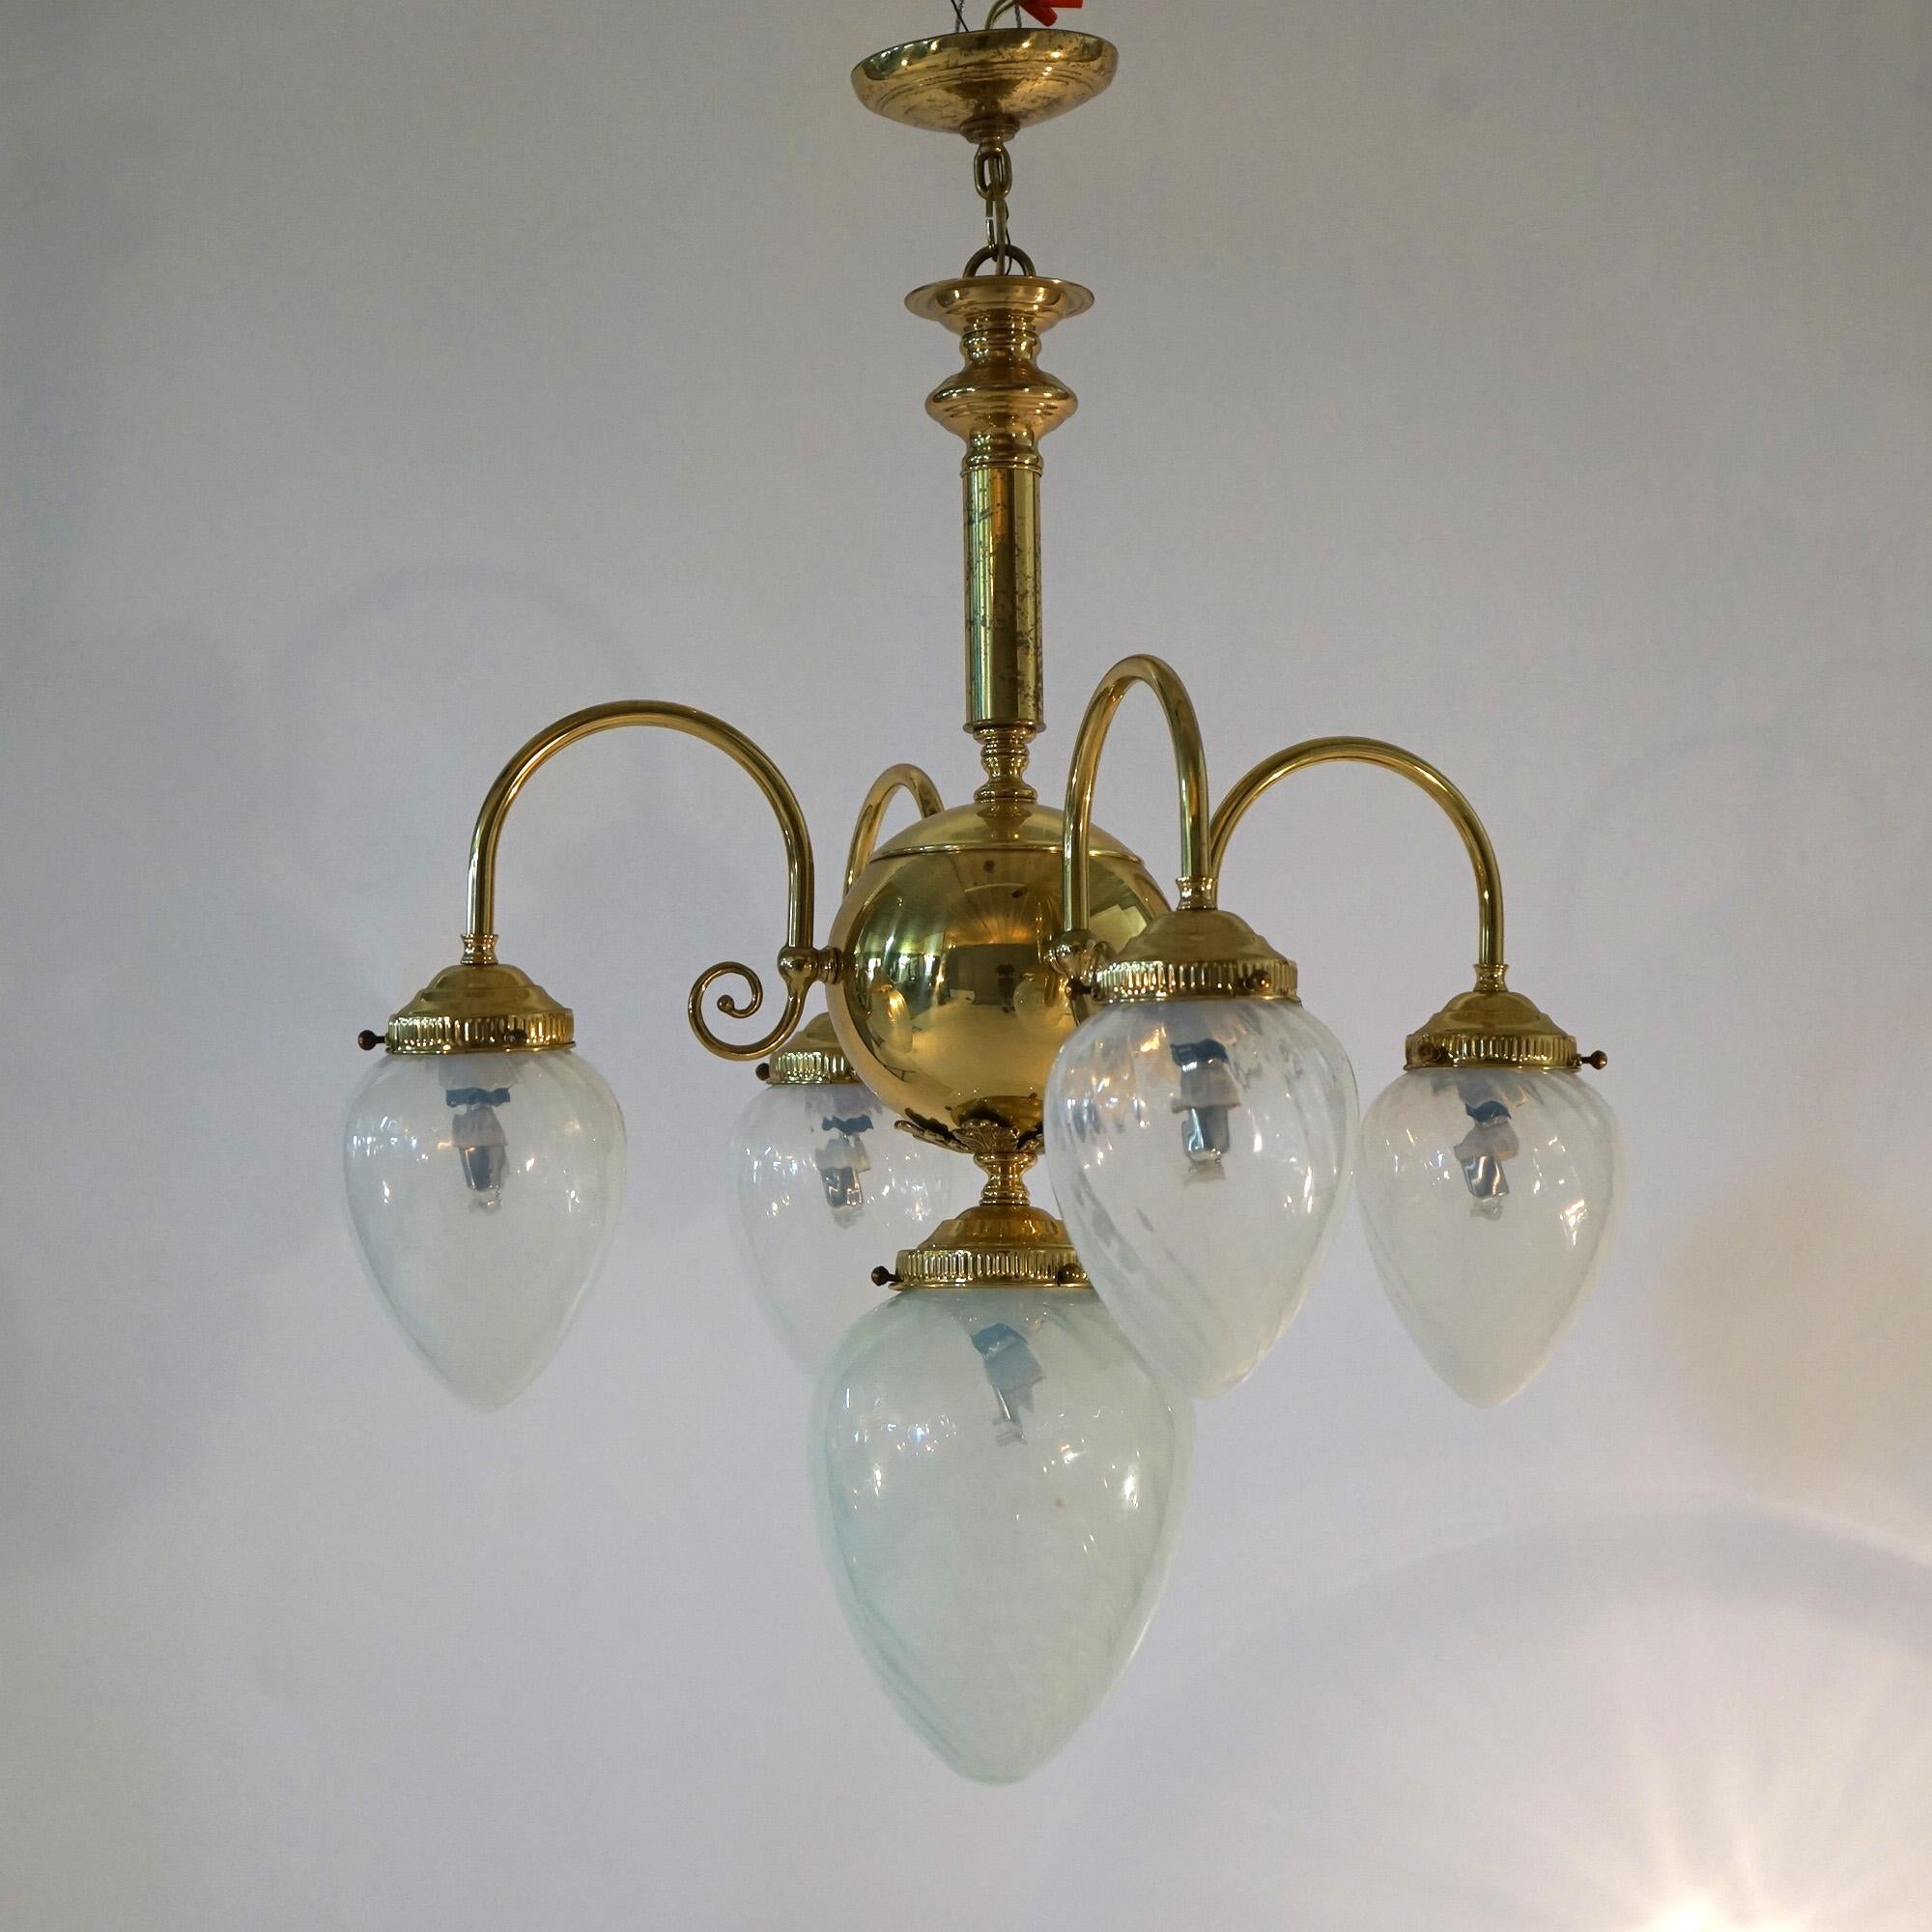 Brass Five-Light Hanging Fixture with Tear Drop Swirl Glass Shades 20th C For Sale 7